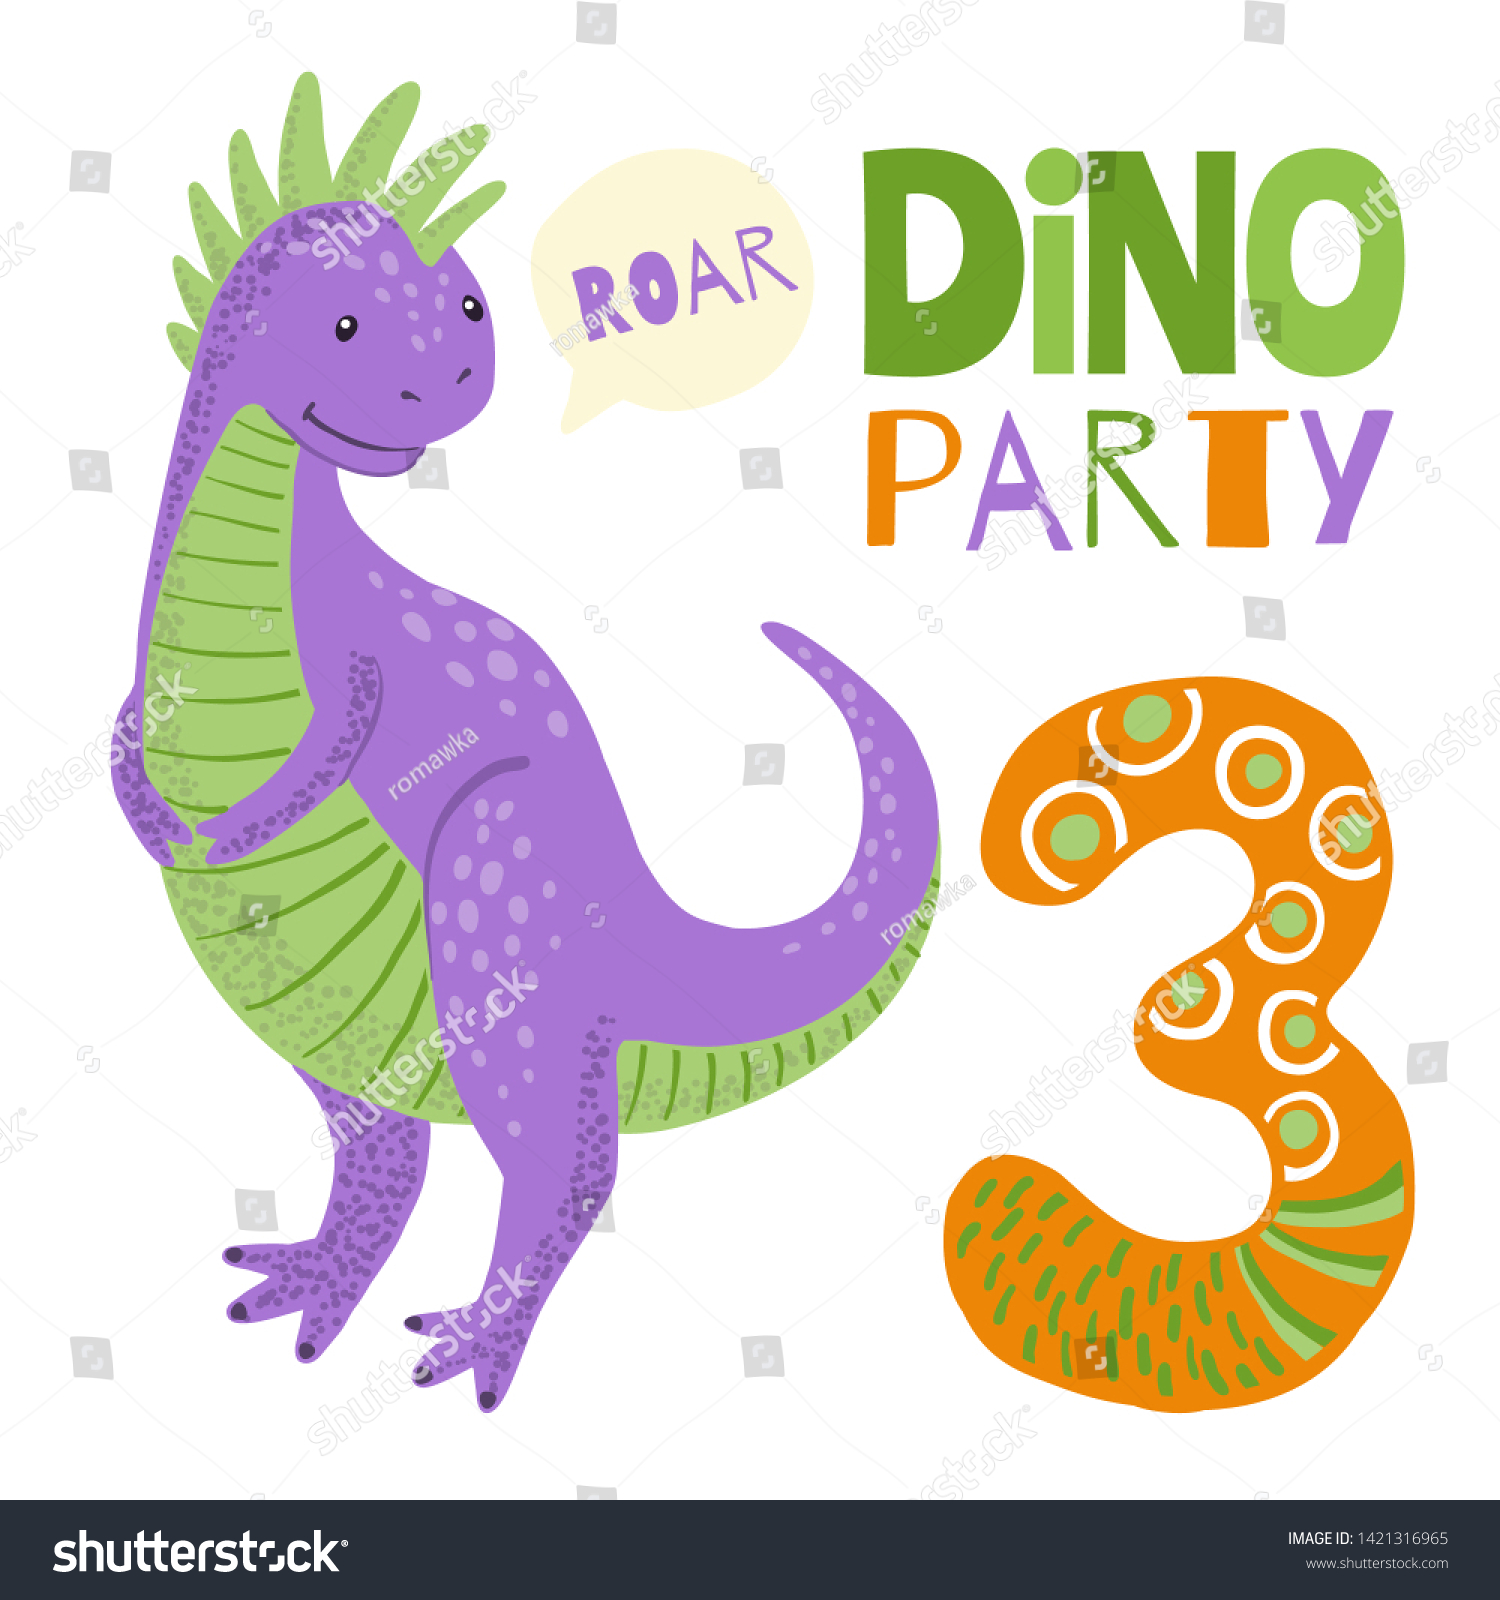 Purple Dinosaur 8 Count Party Invitation & Envelope Pack NEW ZOOMERANG 